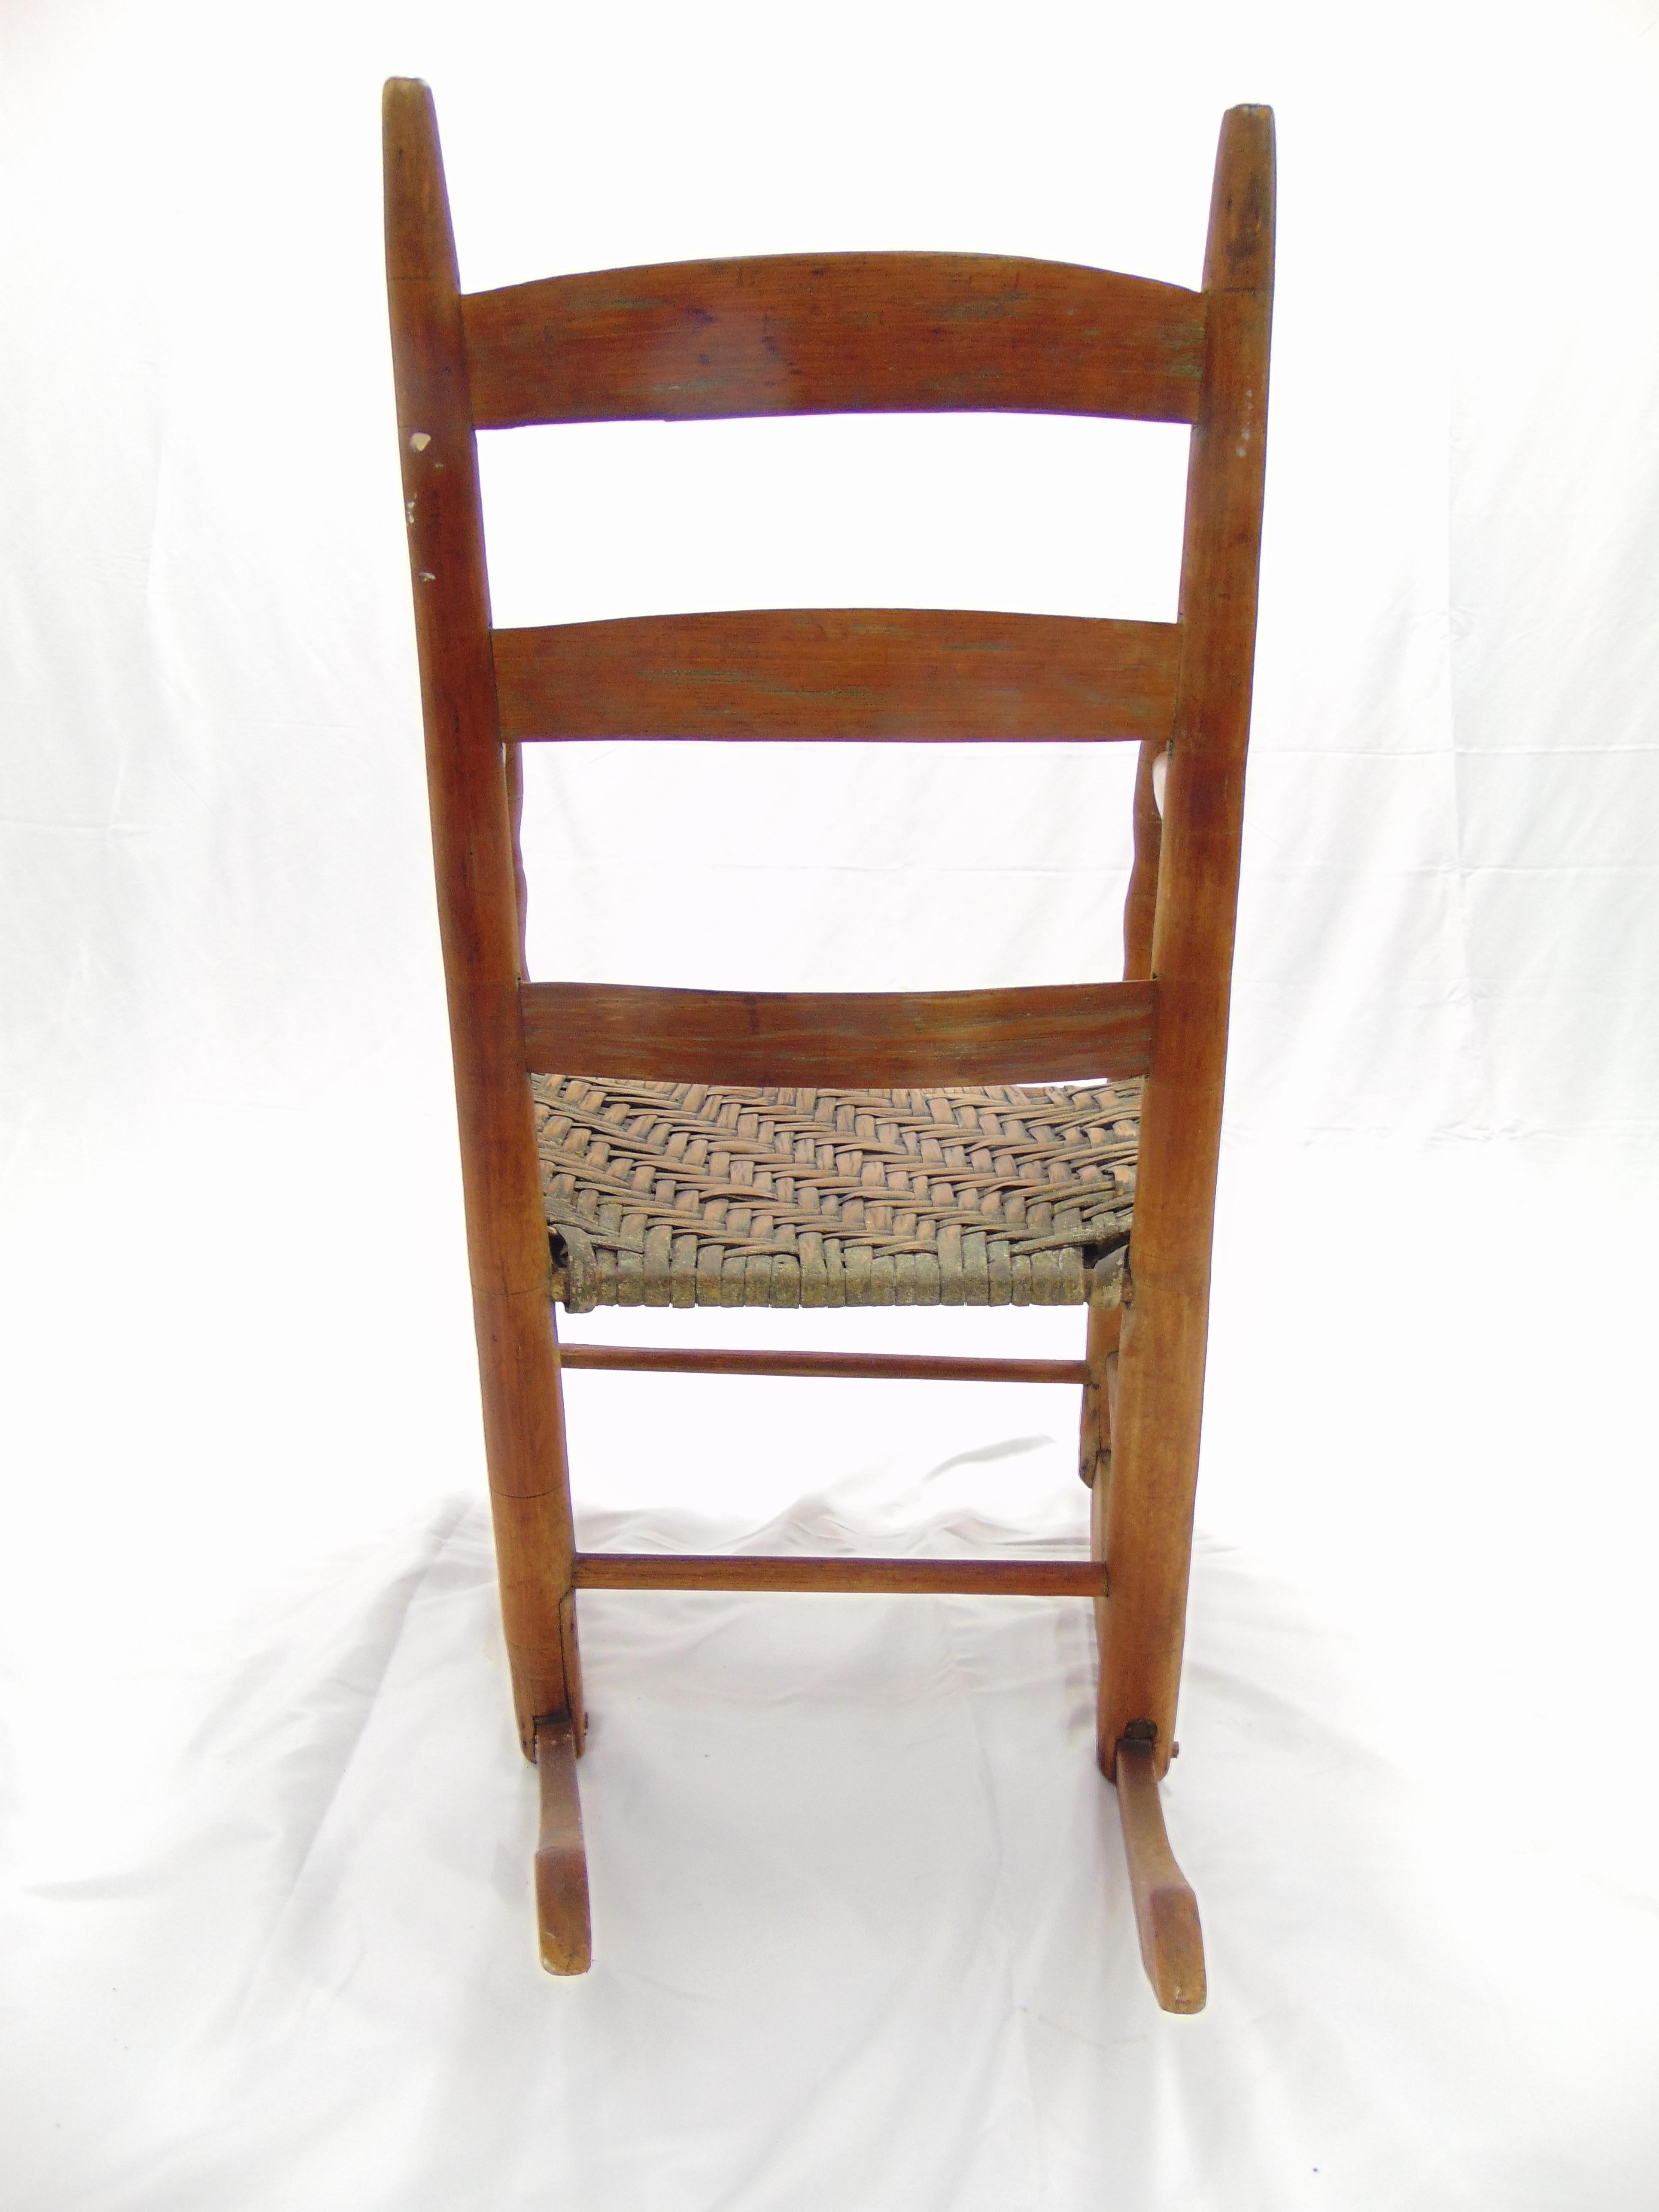 Antique Primitive Ladder Back Rocking Chair with Splint Seat Early 19th Century For Sale 9